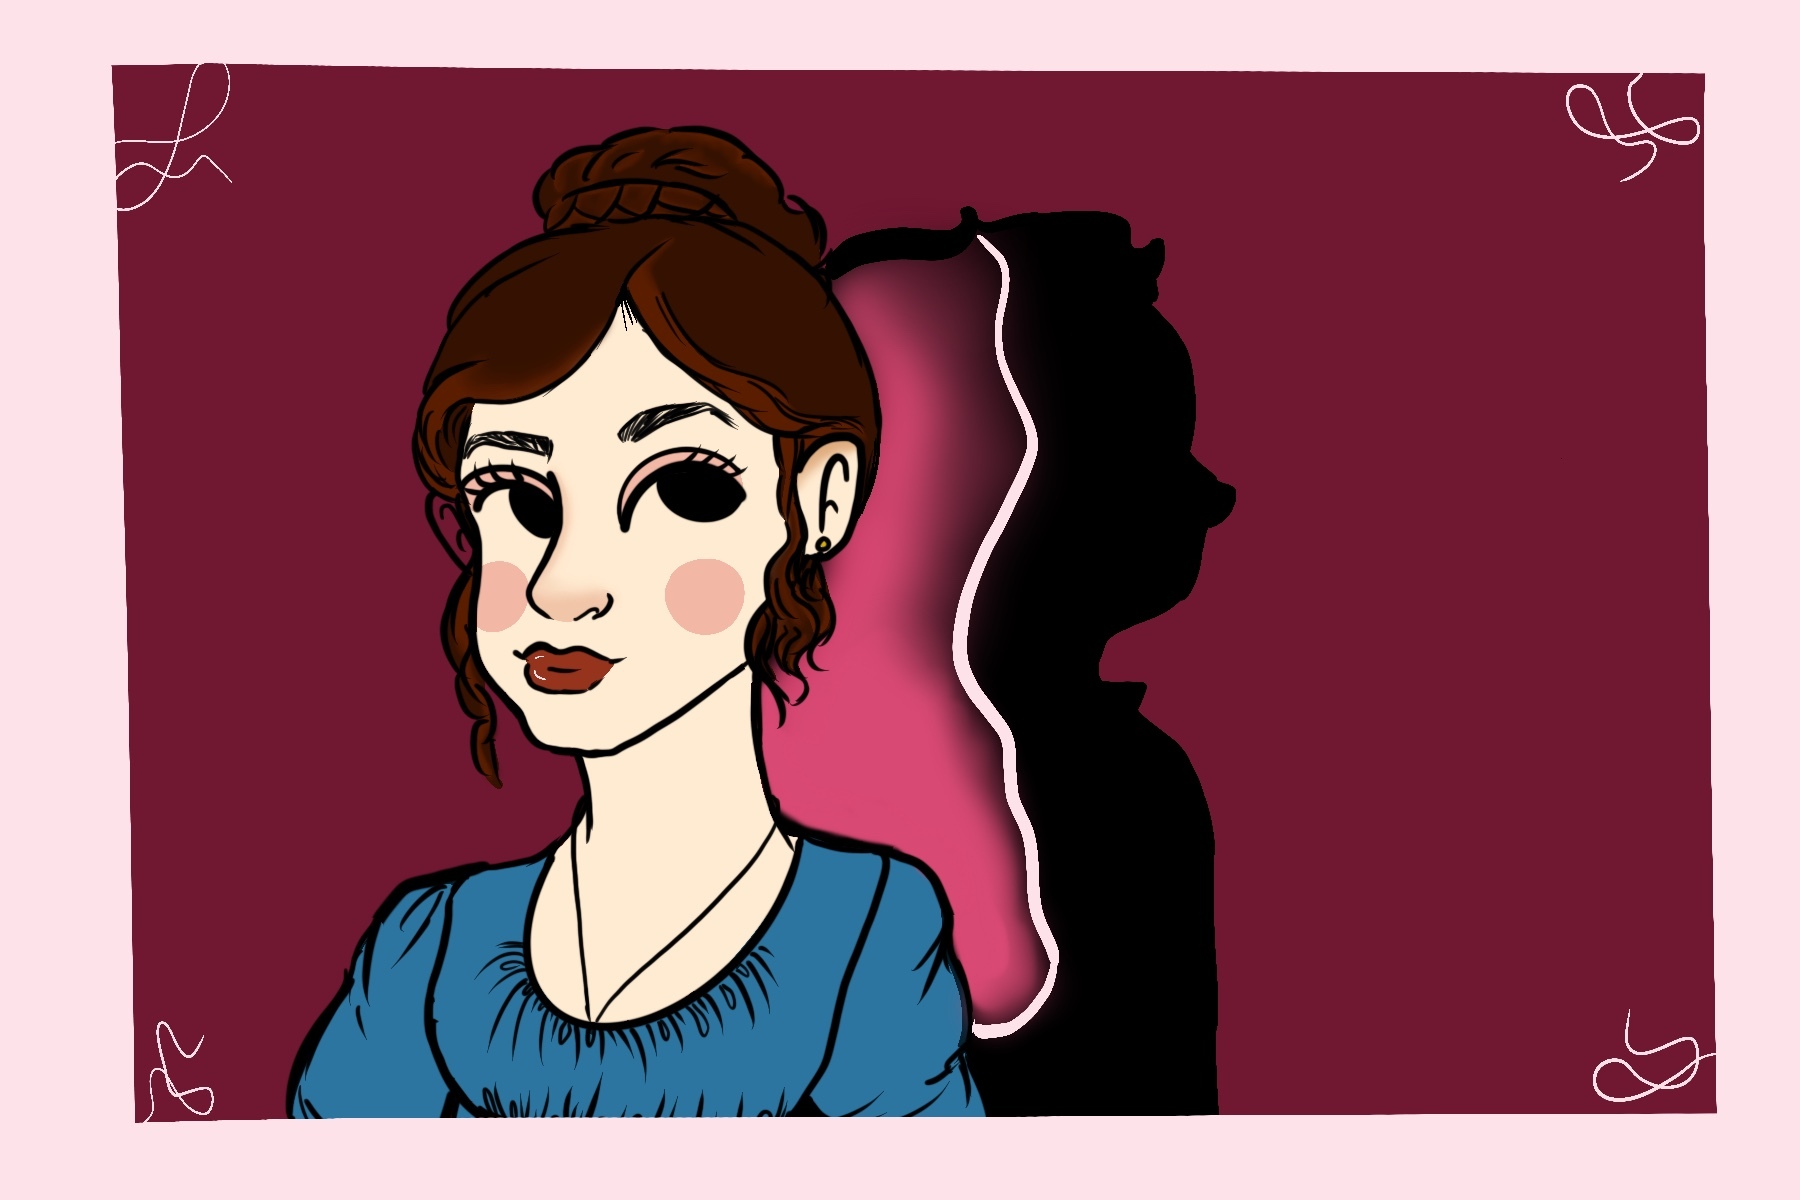 Anne Elliot from "Persuasion" with a shadow of a man behind her